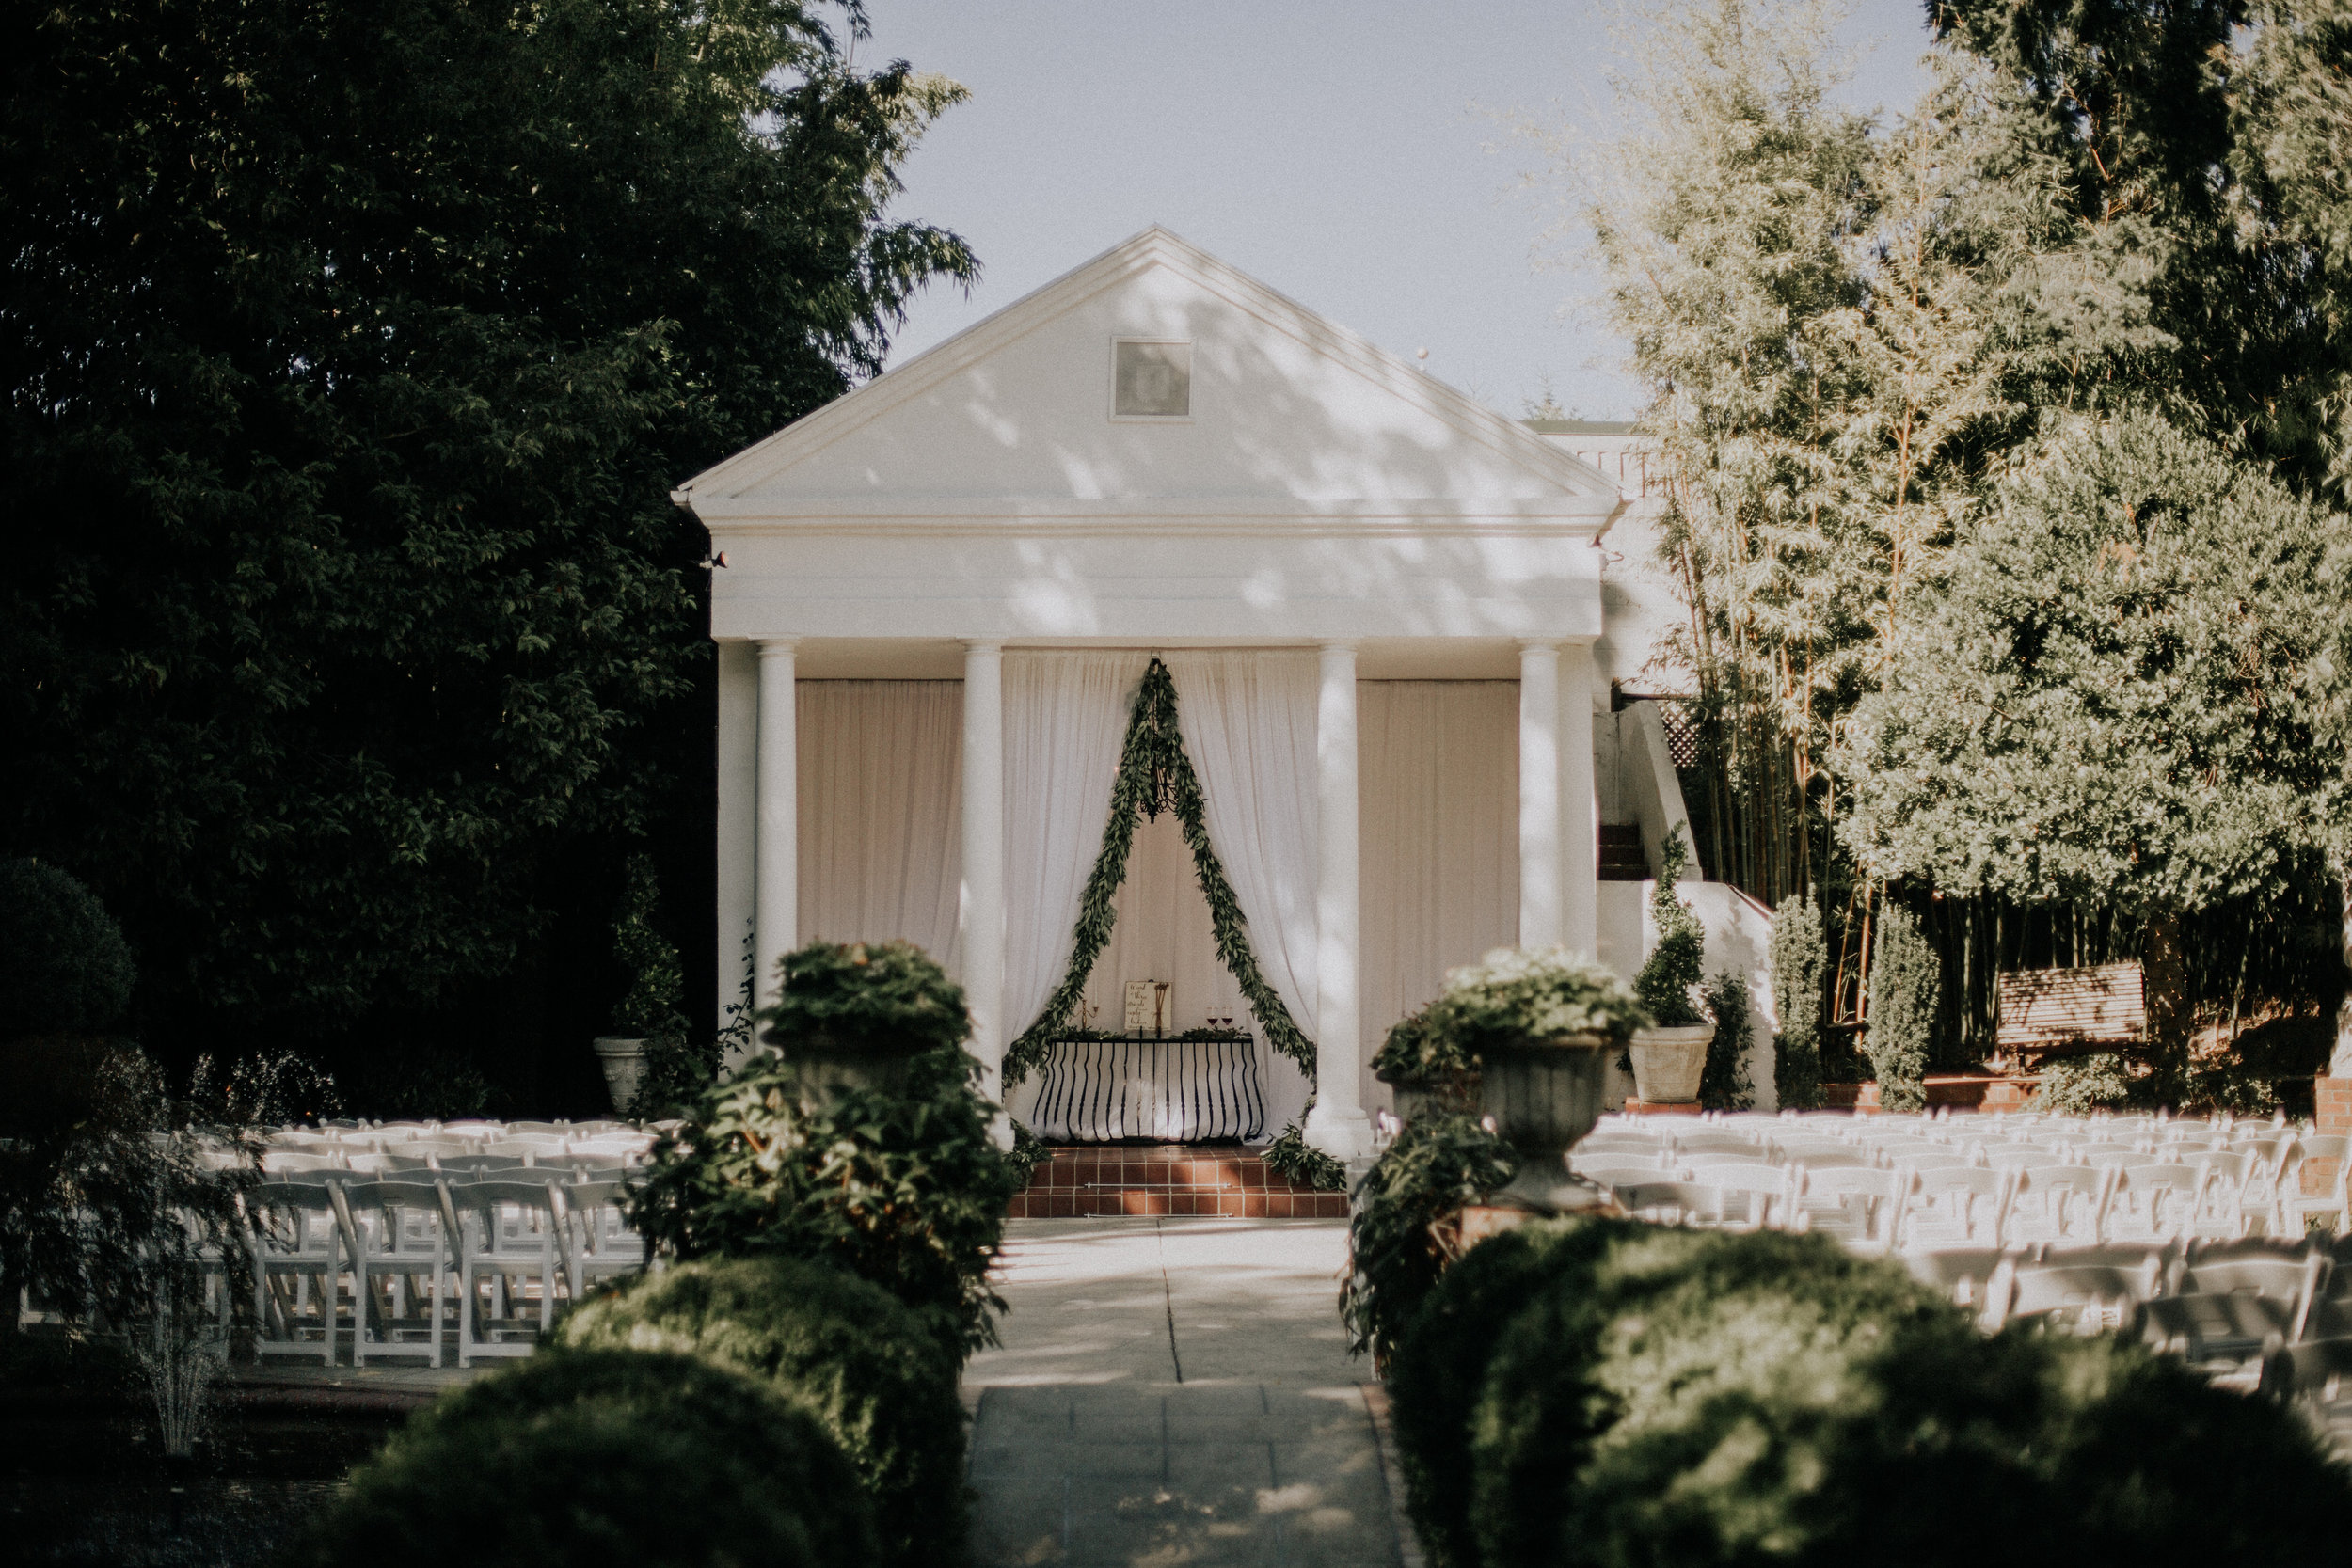 The ceremony site at Gray Gables Estate